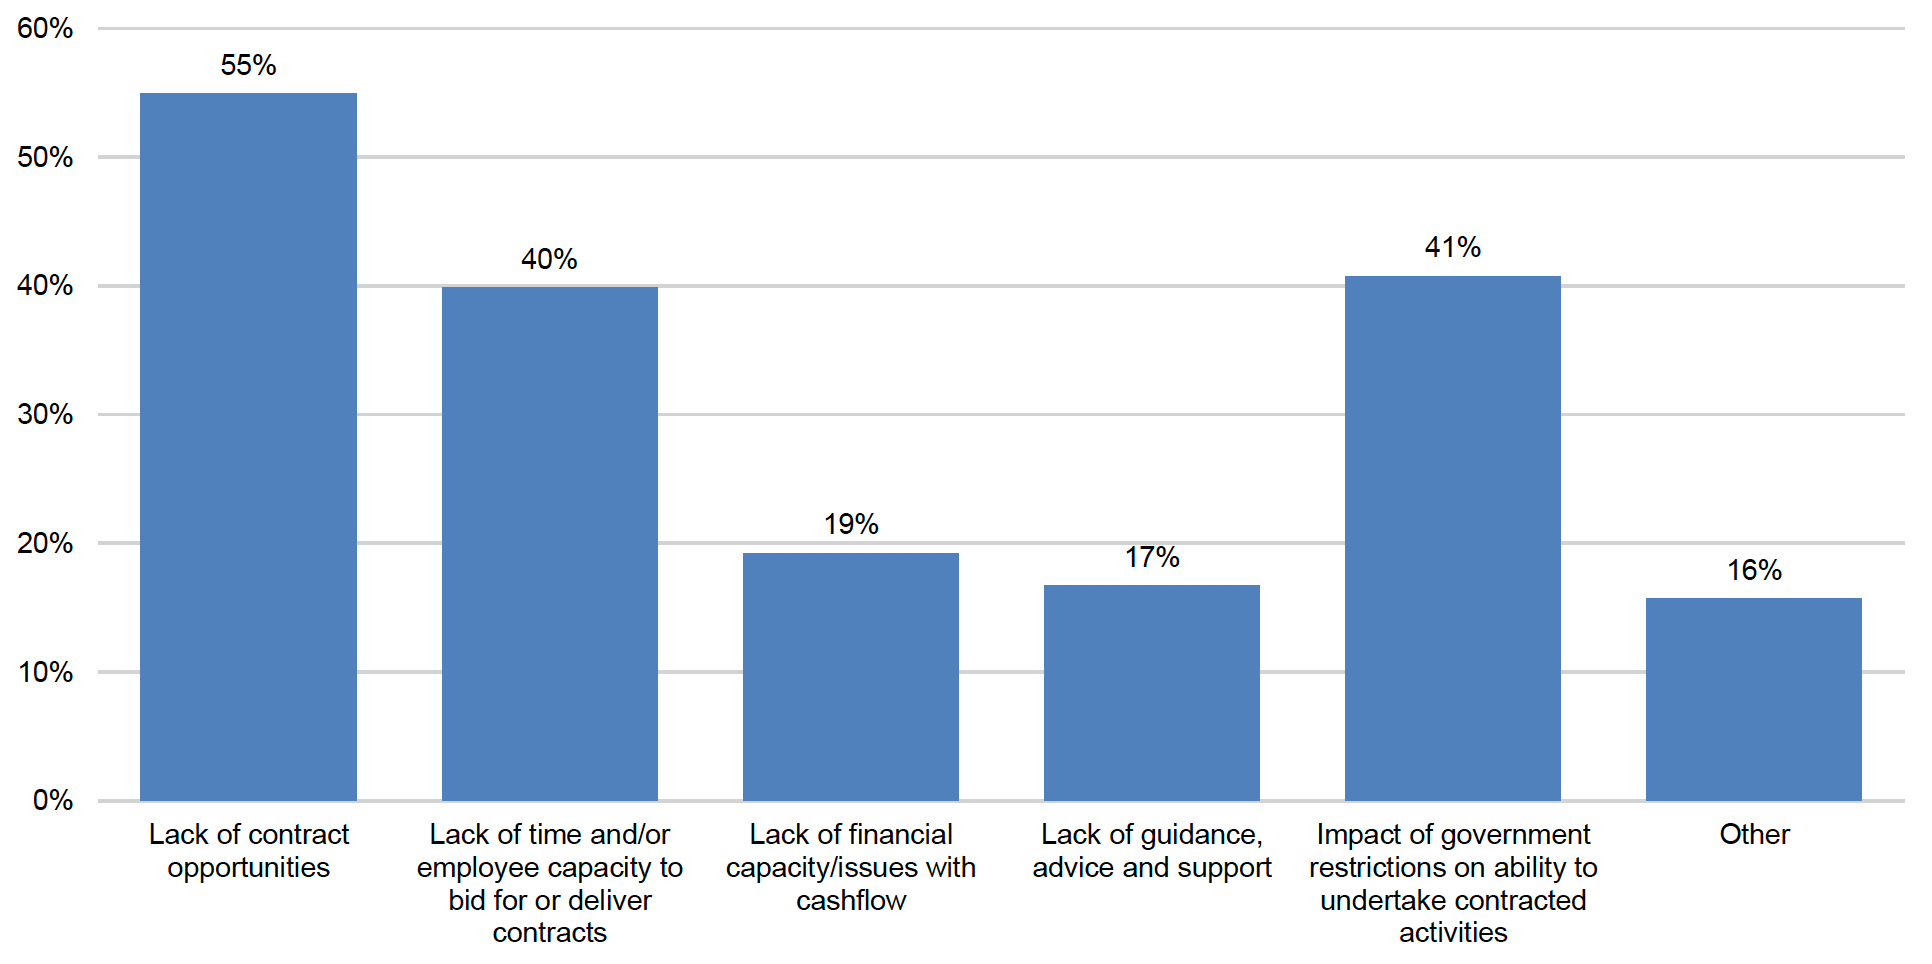 Figure 3.17 shows survey respondents’ views on the main barriers to them or their organisation in bidding for or delivering Scottish public sector contracts during the pandemic. For example, it shows that 55% of respondents identified ‘lack of contract opportunities’ as a barrier. 